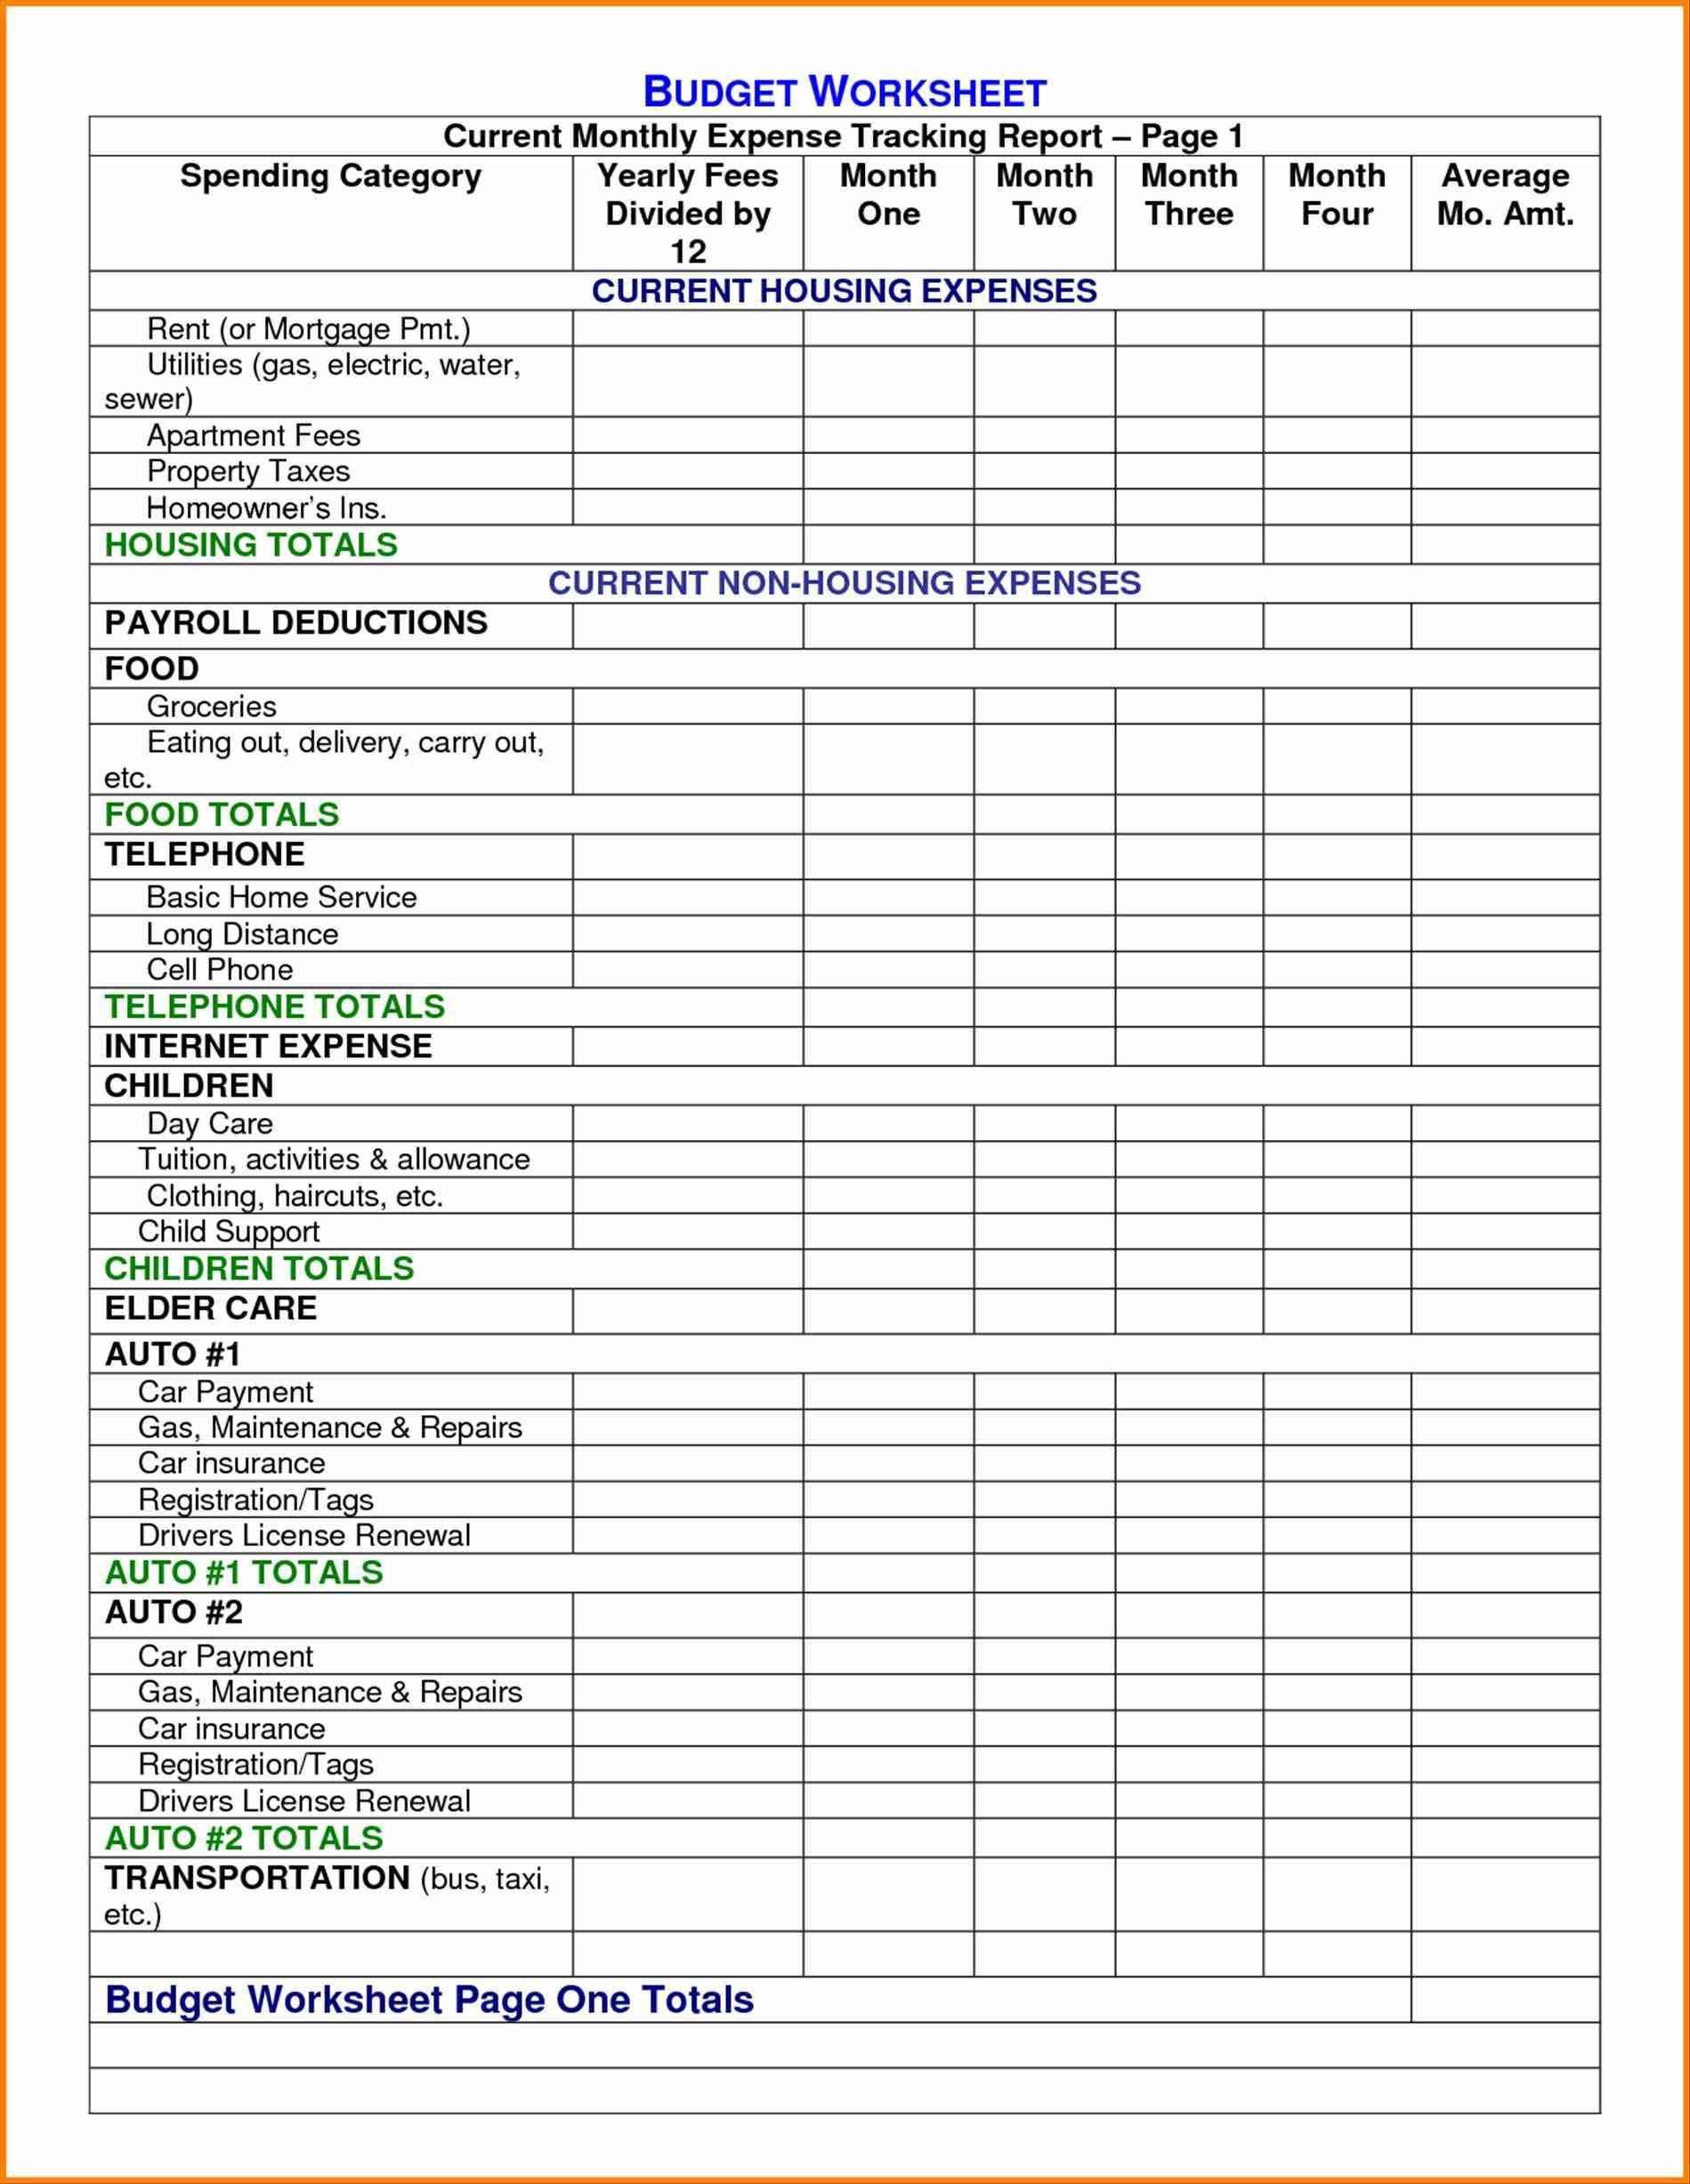 Business Expense Budget Spreadsheet Regarding Small Business Budget Template Excel Free Inspirationa Excel